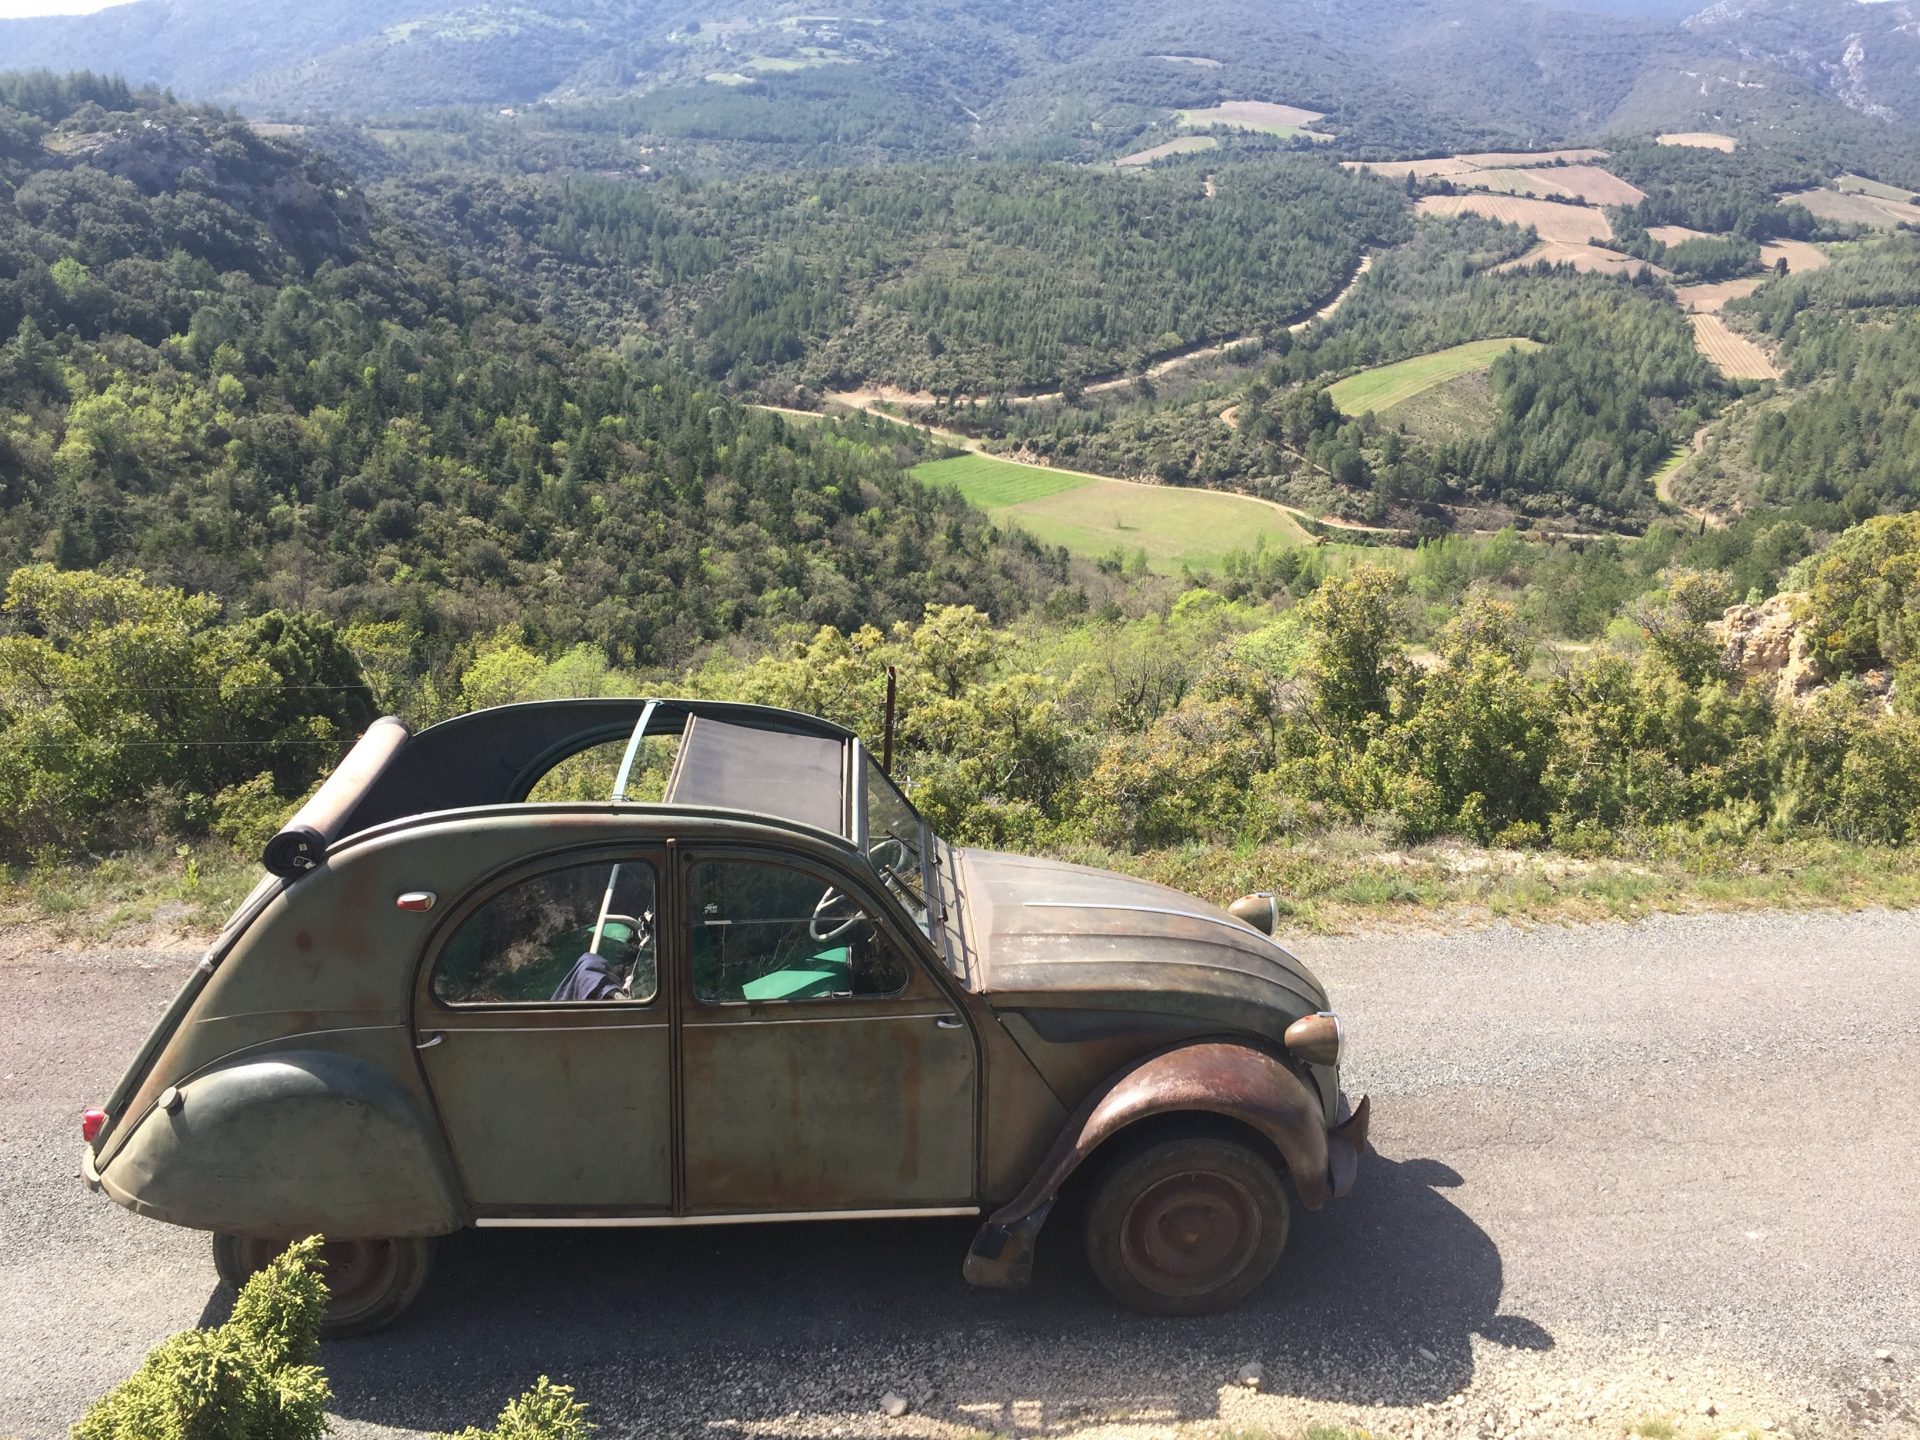 Overlook some of the La Lavinière vineyards after a drive up in an old 2CV. Gorgeous.